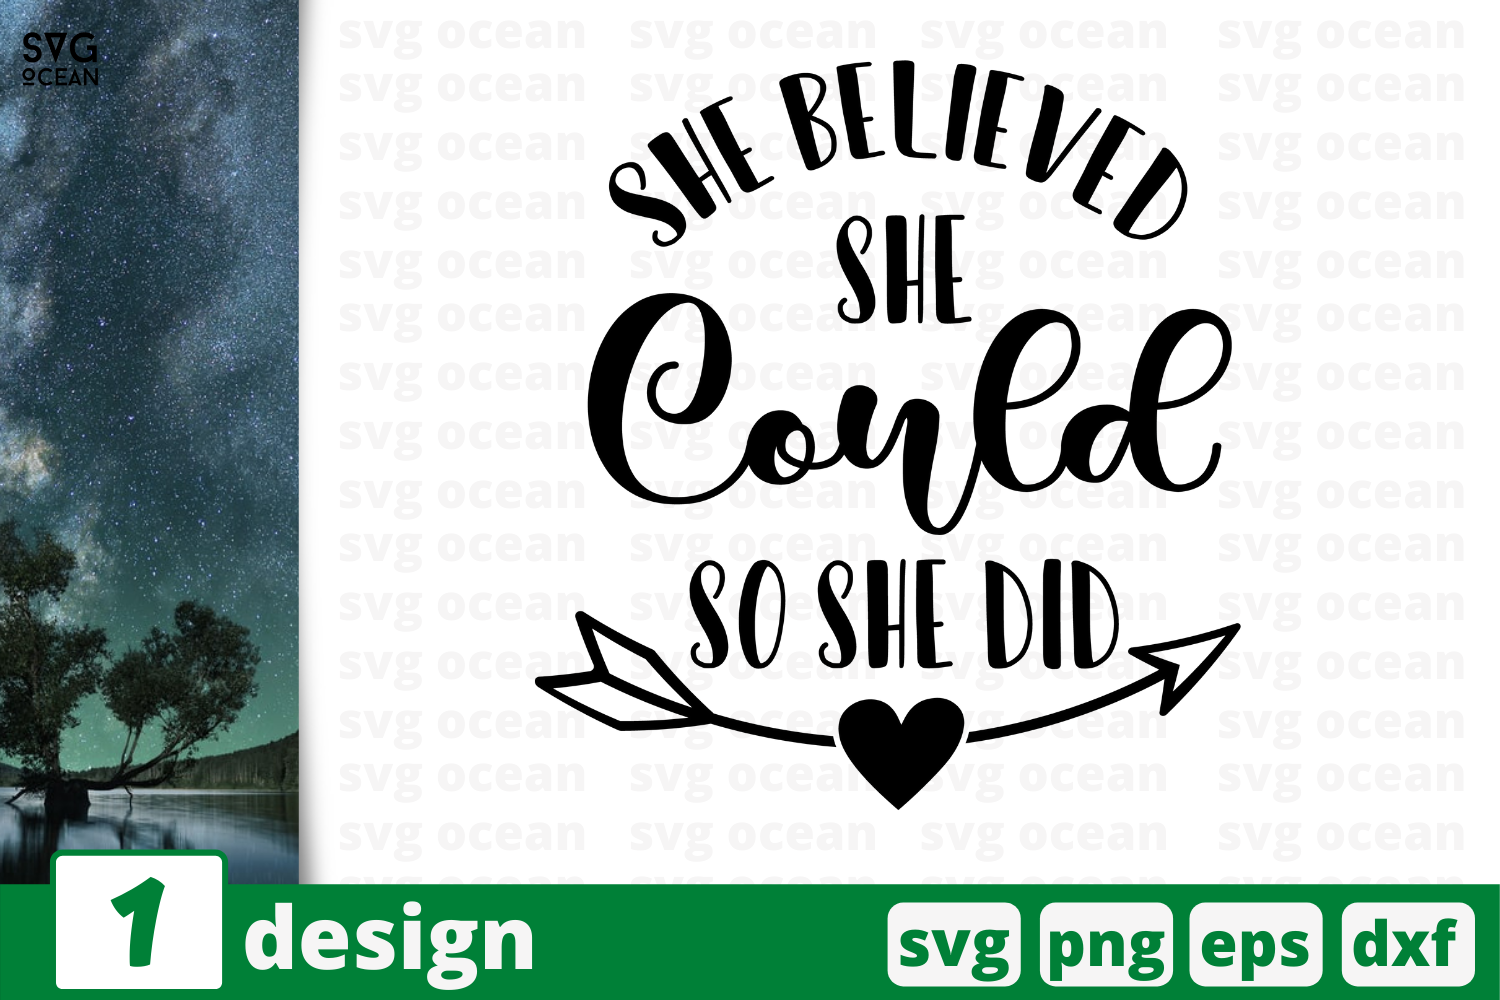 She Believed She Could So She Did Inspiration Quotes Cricut Svg By Svgocean Thehungryjpeg Com